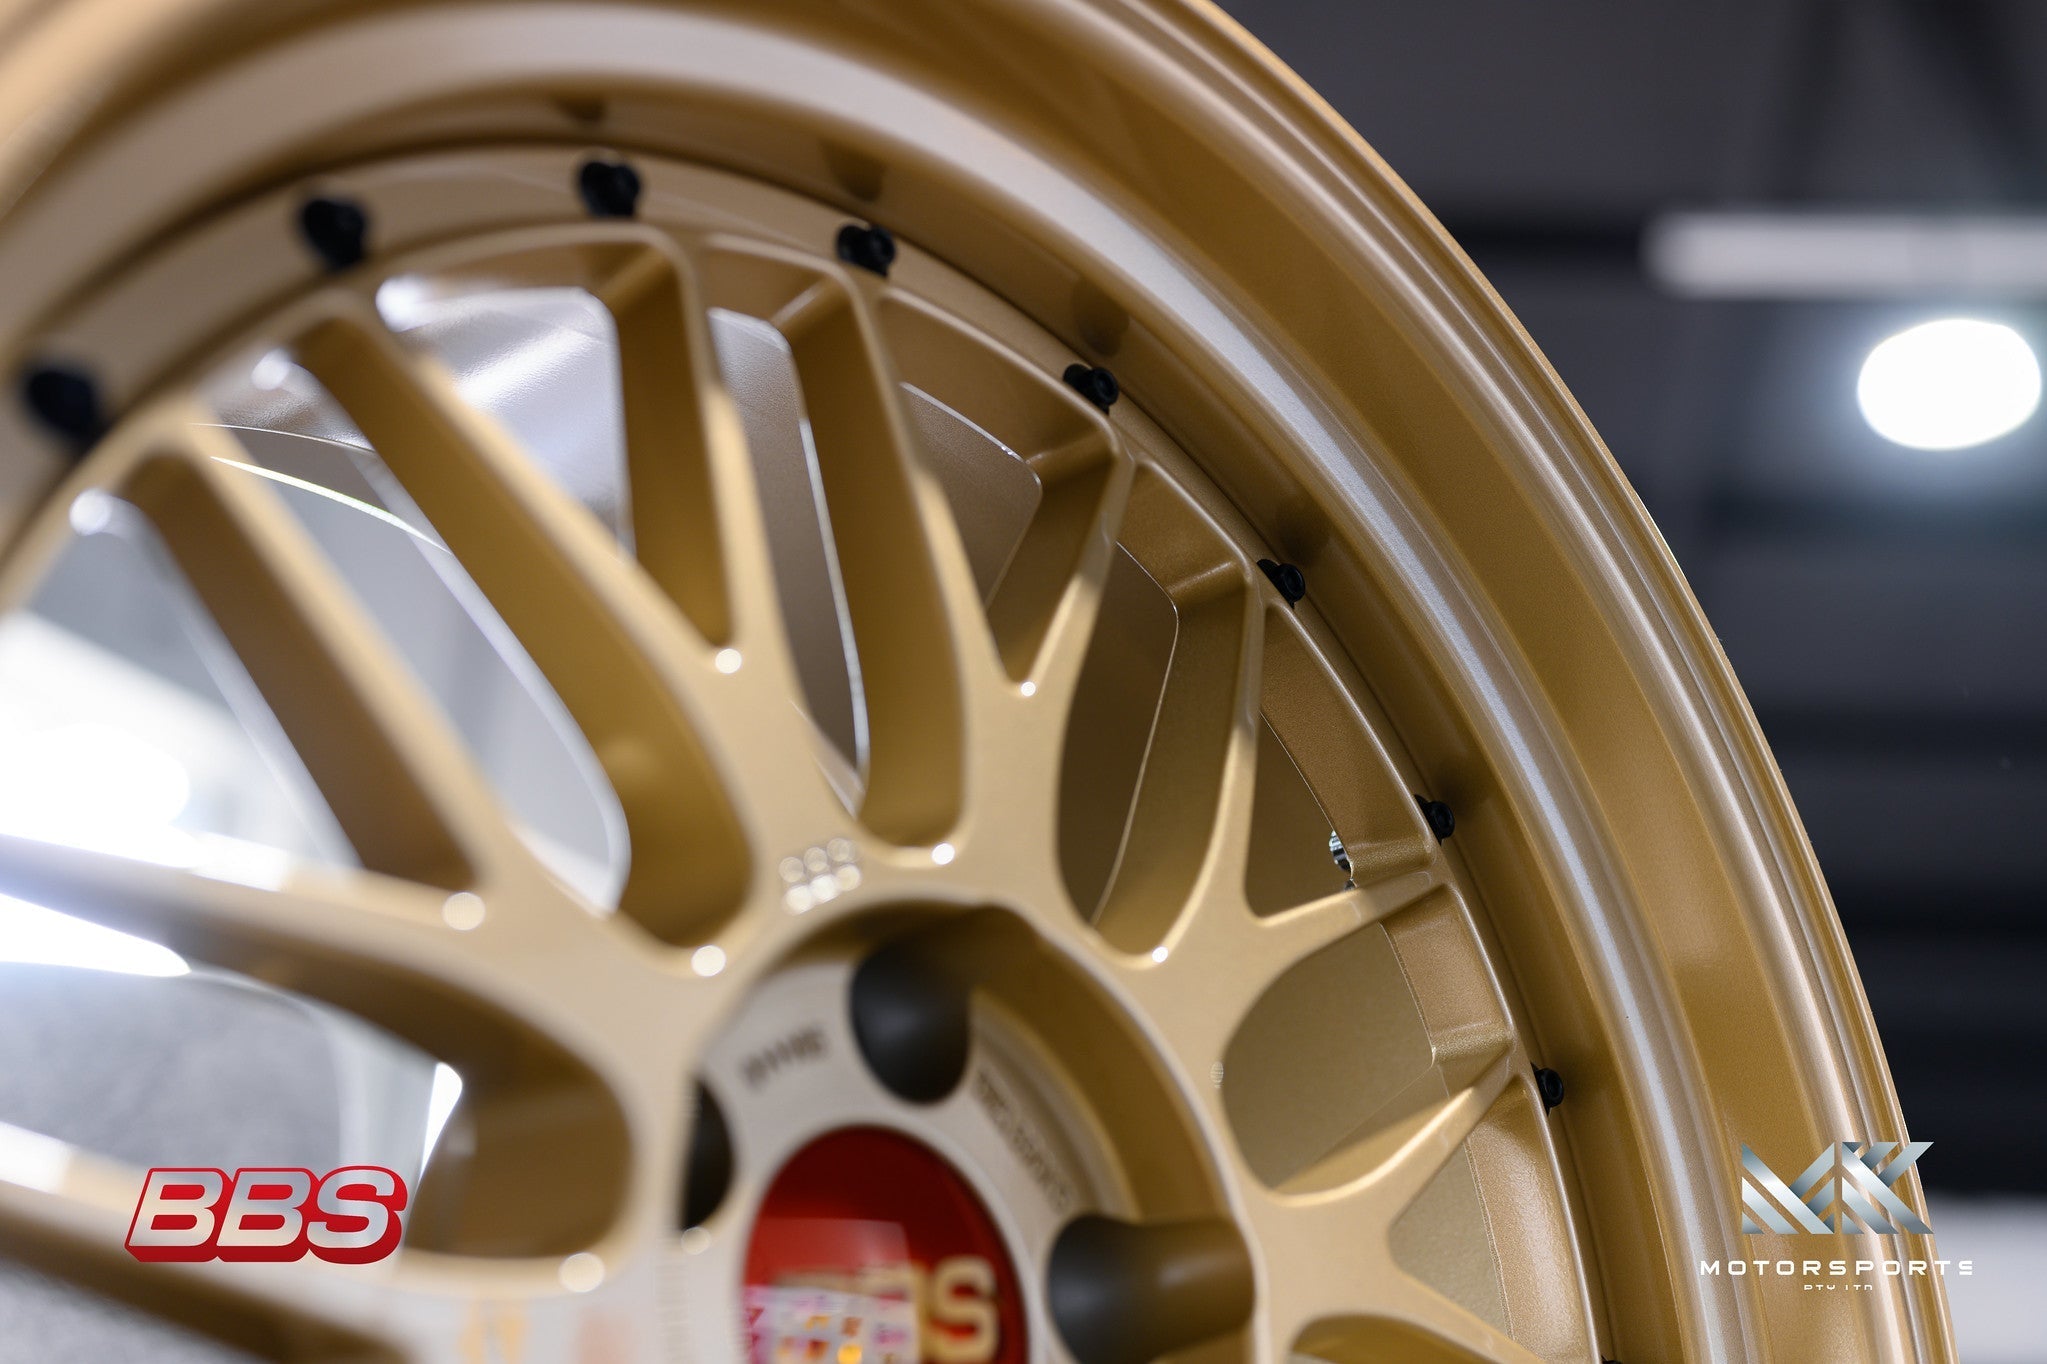 BBS LM F1 Championship Edition - Premium Wheels from BBS Japan - From just $8090.0! Shop now at MK MOTORSPORTS